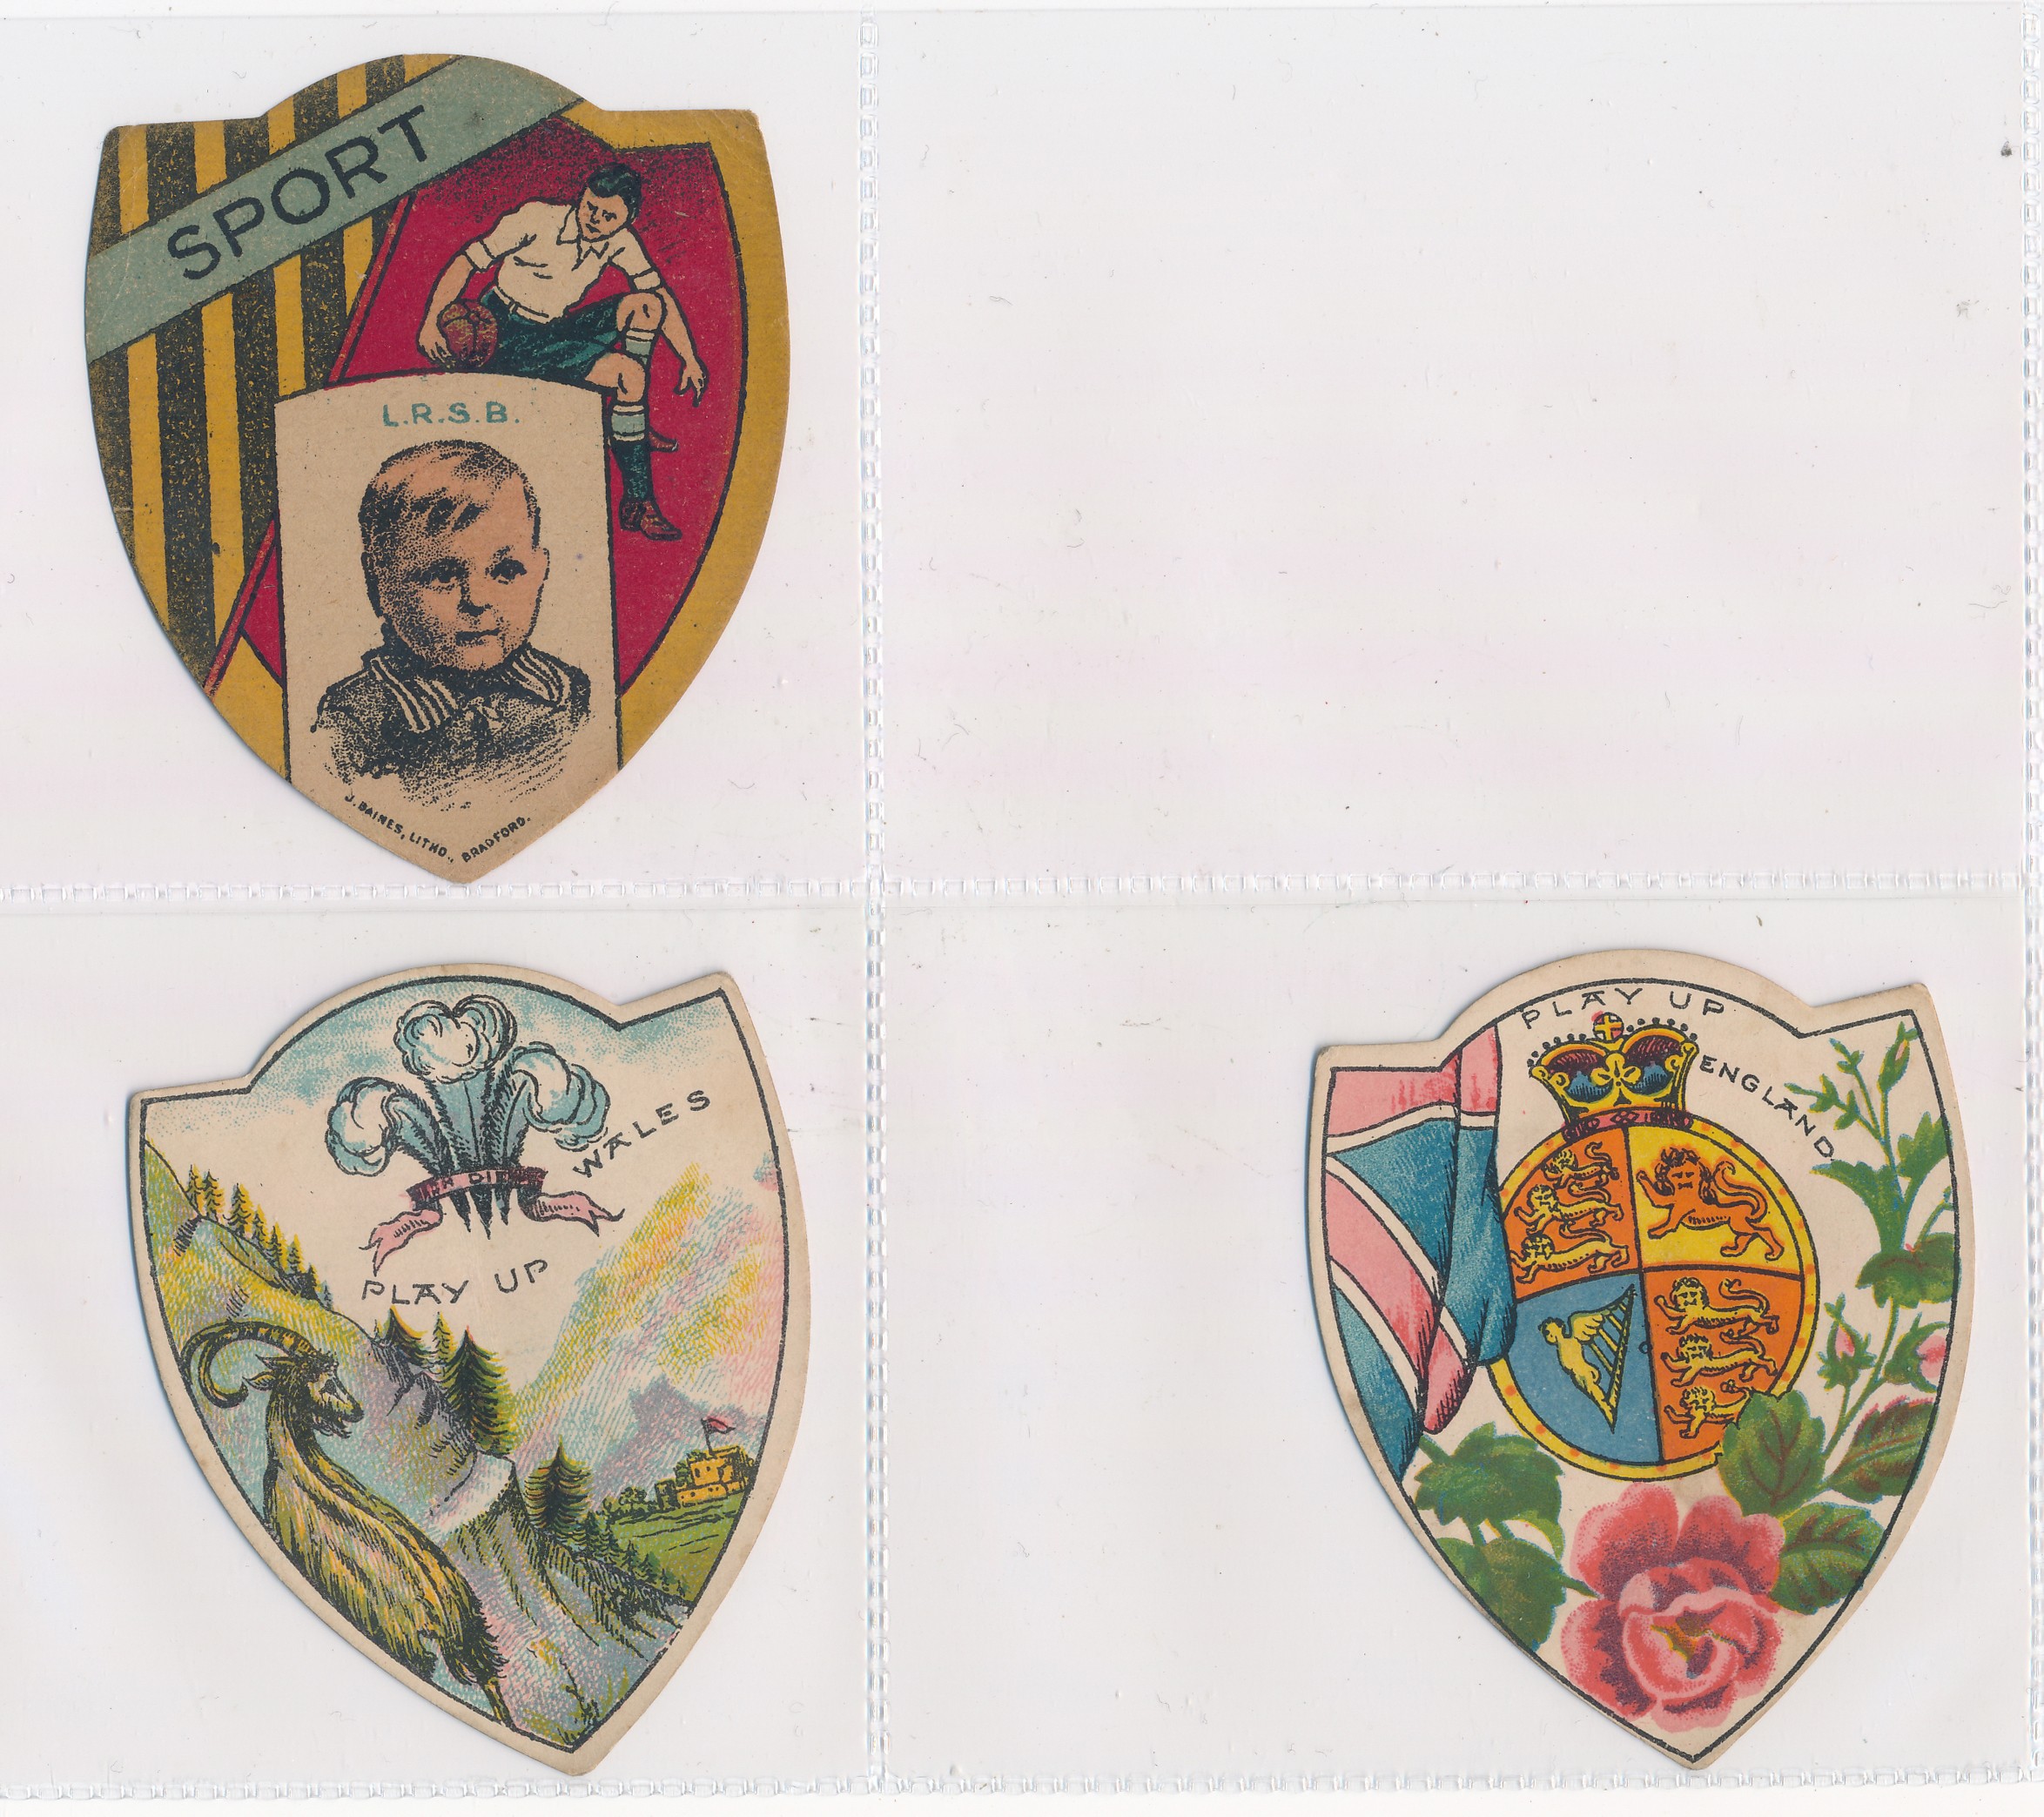 Baines trade cards, Shield shaped Rugby cards (7) with "Sport L.R.S.B.", York All Saints', Wales, - Image 3 of 4